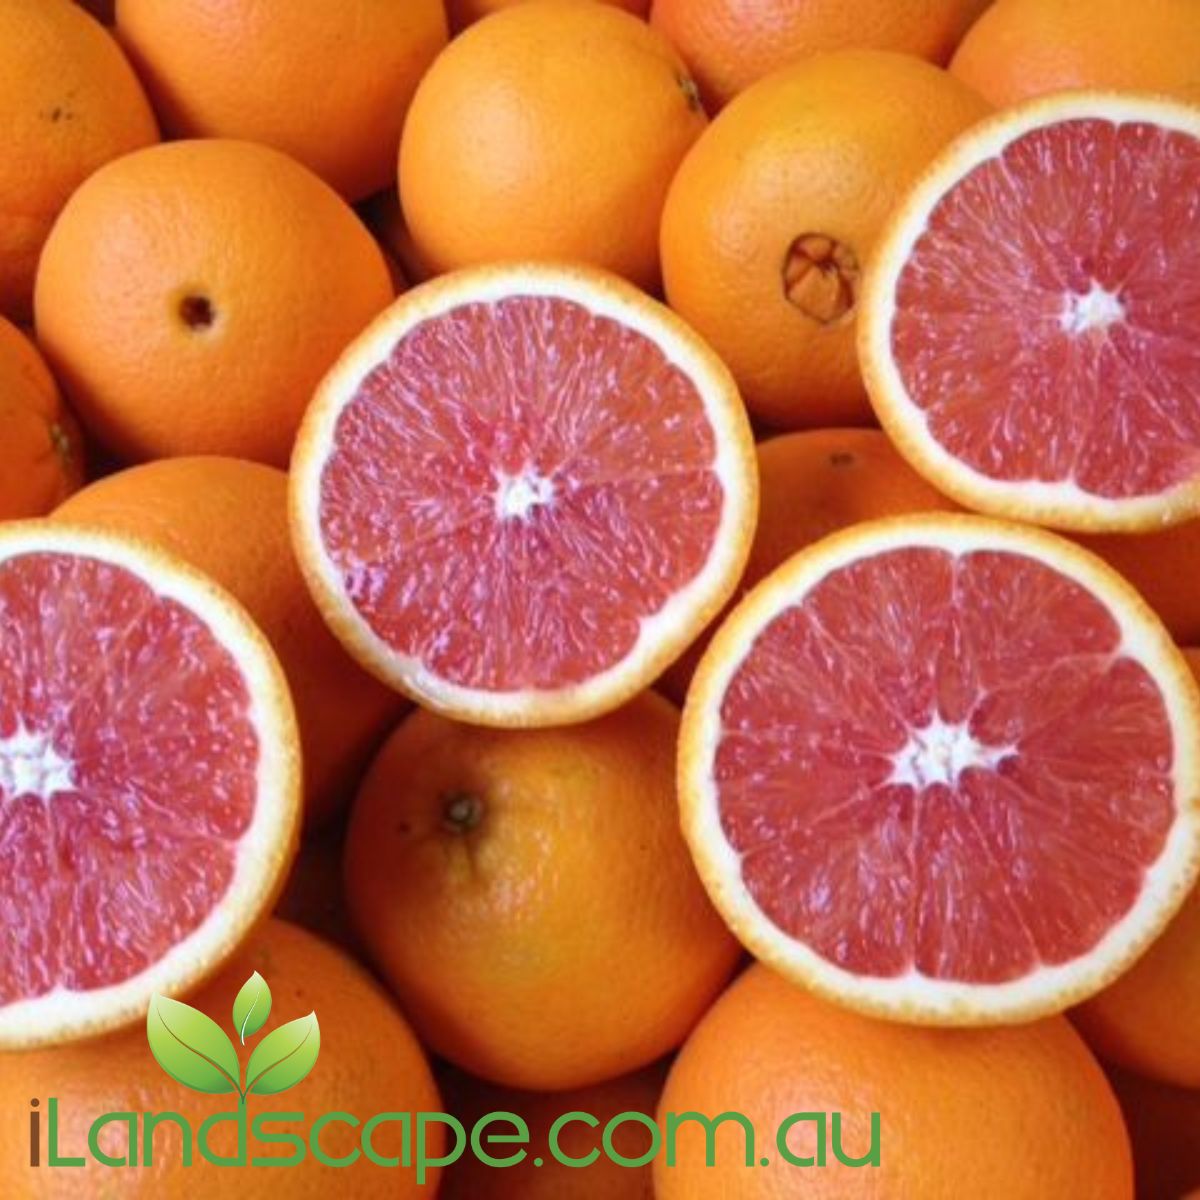 Orange Dwarf 'Cara cara' blood navel is a red fleshed navel orange. the fruit is larger than a normal orange and its pretty sweet.   grows between 2-3 m tall and fruits between June - September  Grow in full sun for best results 